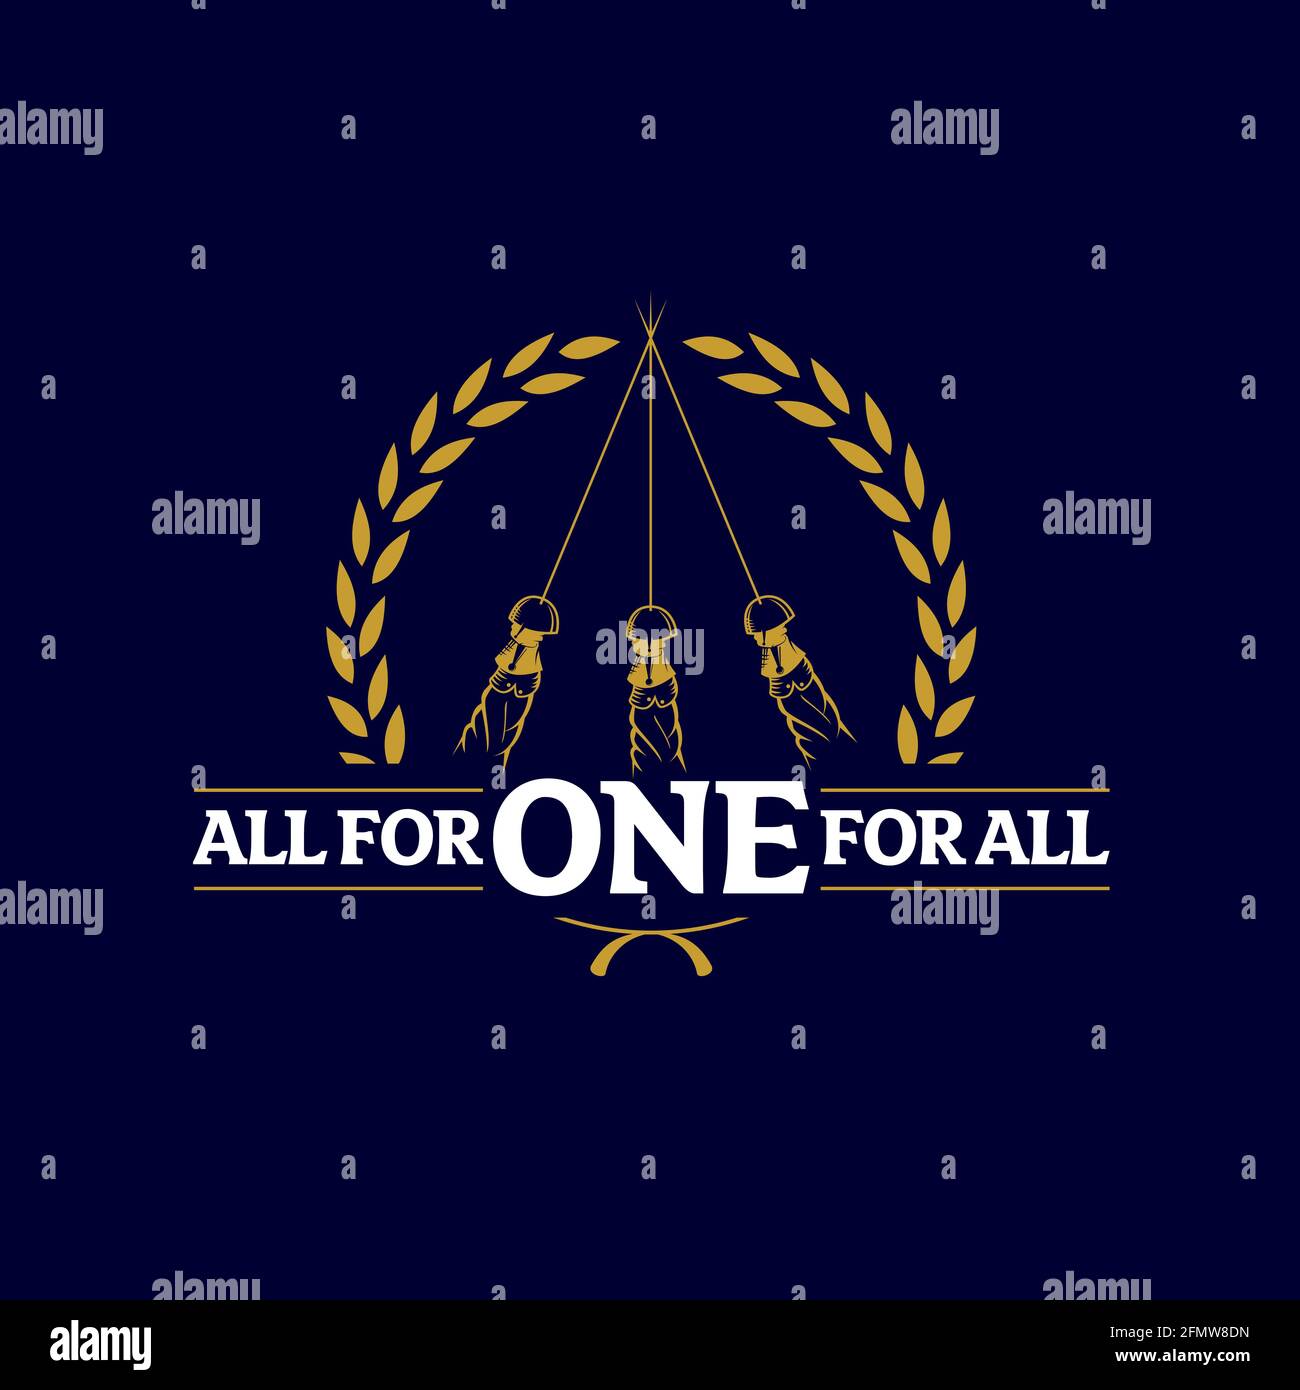 All For One For All vector illustration for commercial use such as logo, tshirt graphic, etc... Stock Vector